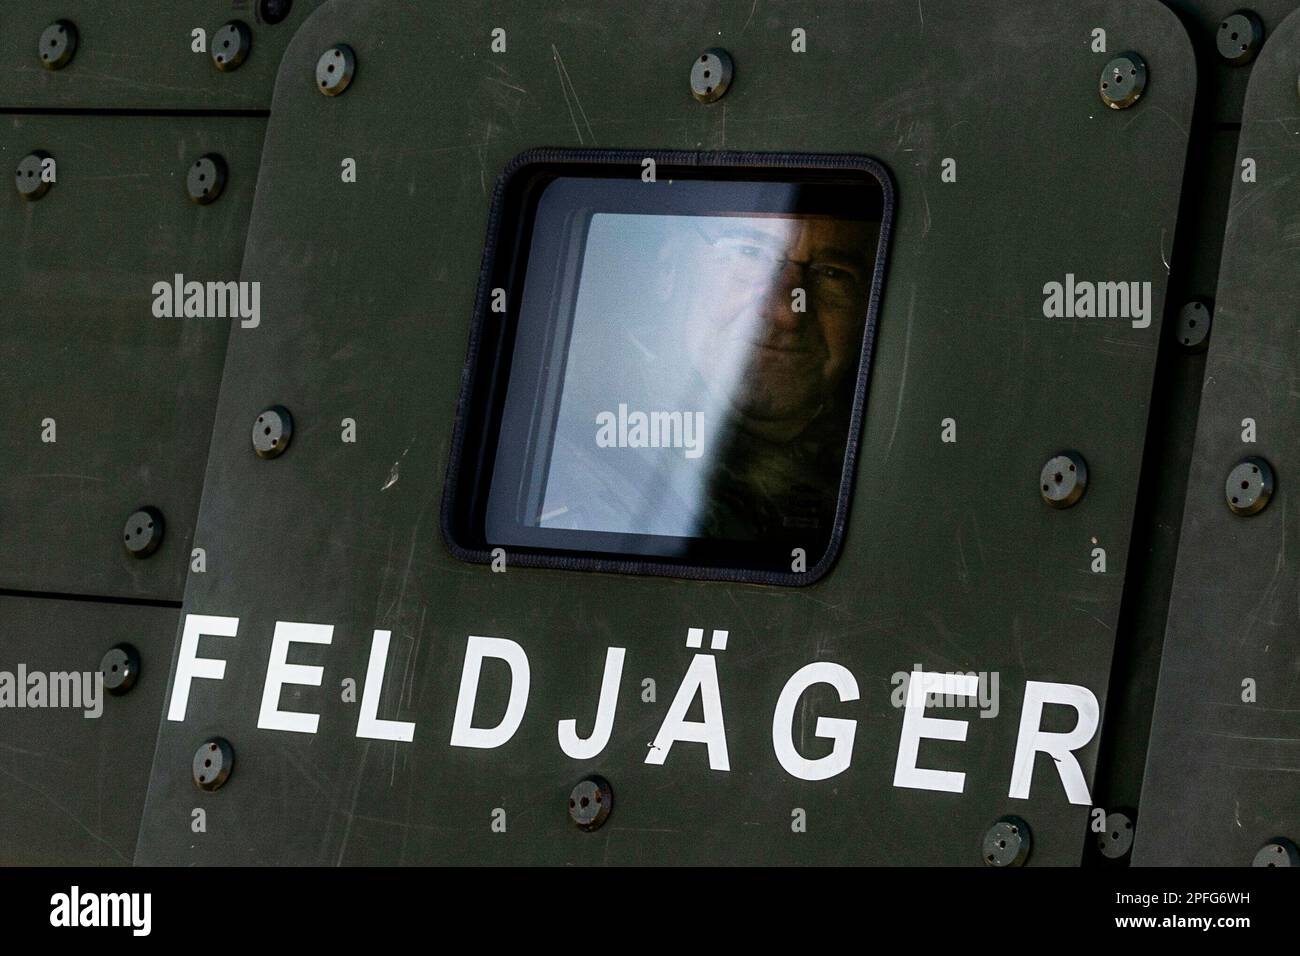 Boris Pistorius (SPD), Federal Minister of Defence, photographed as part of a field jaeger capability show during a visit to the Bundeswehr military base in Mahlwinkel, March 16, 2023. Key skills of the armed forces base are to be shown on the basis of skills demonstrations. Stock Photo